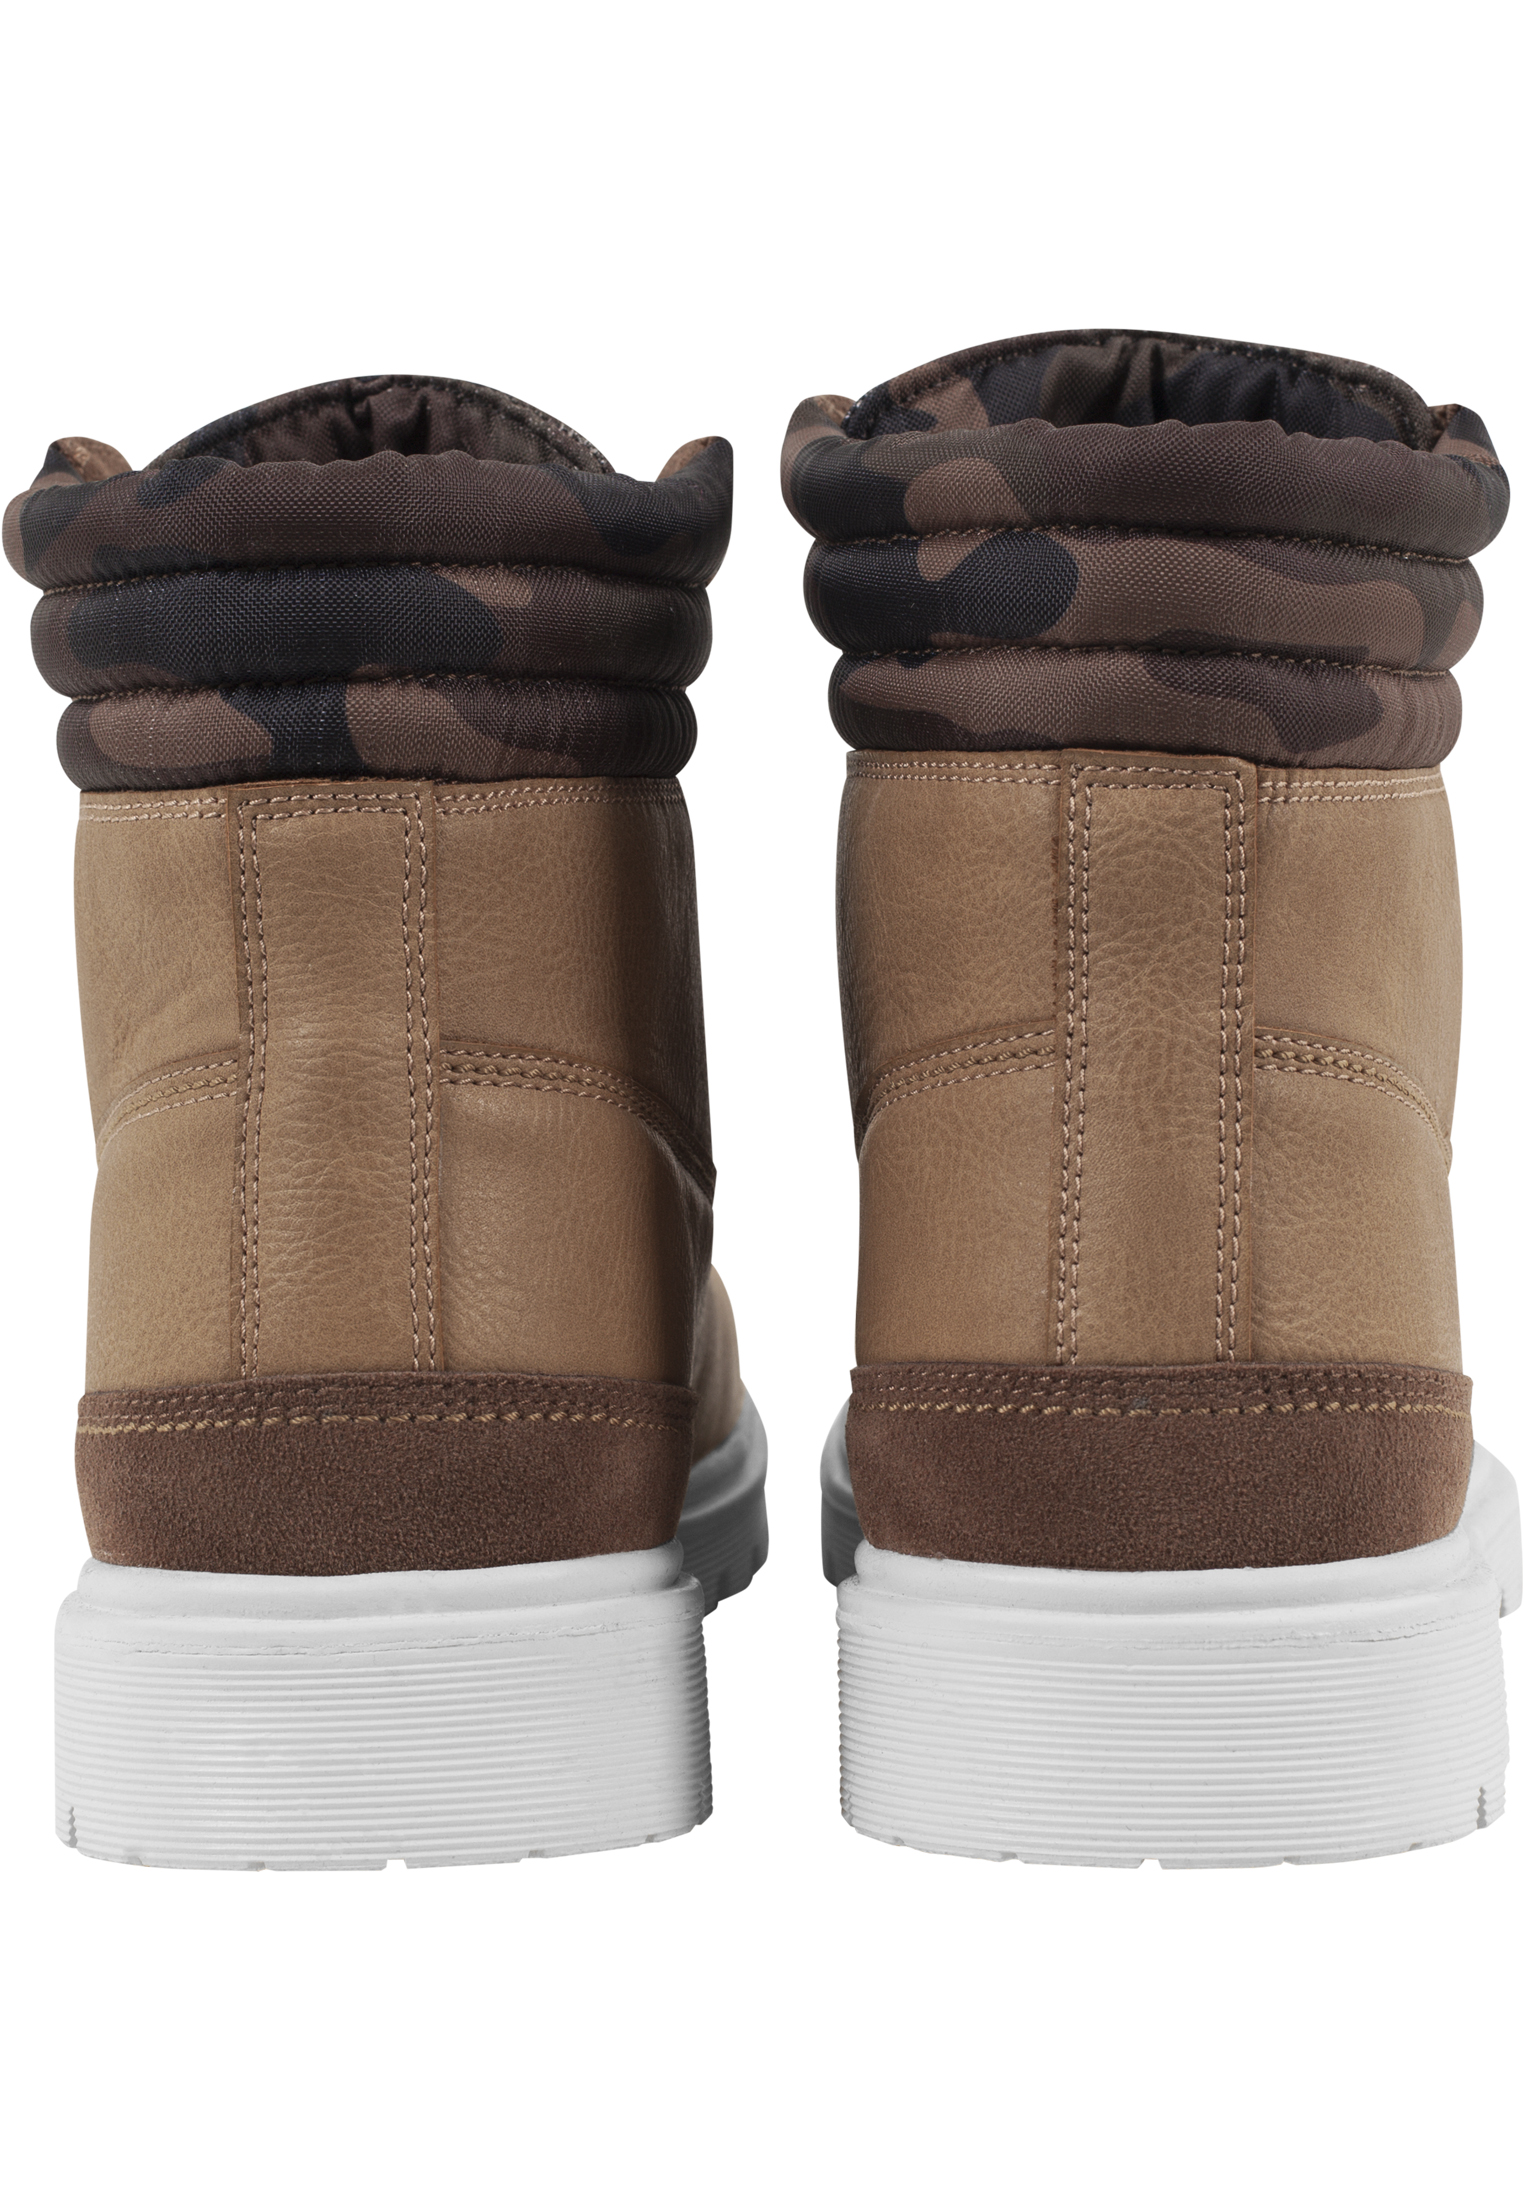 Schuhe Winter Boots in Farbe beige/woodcamo